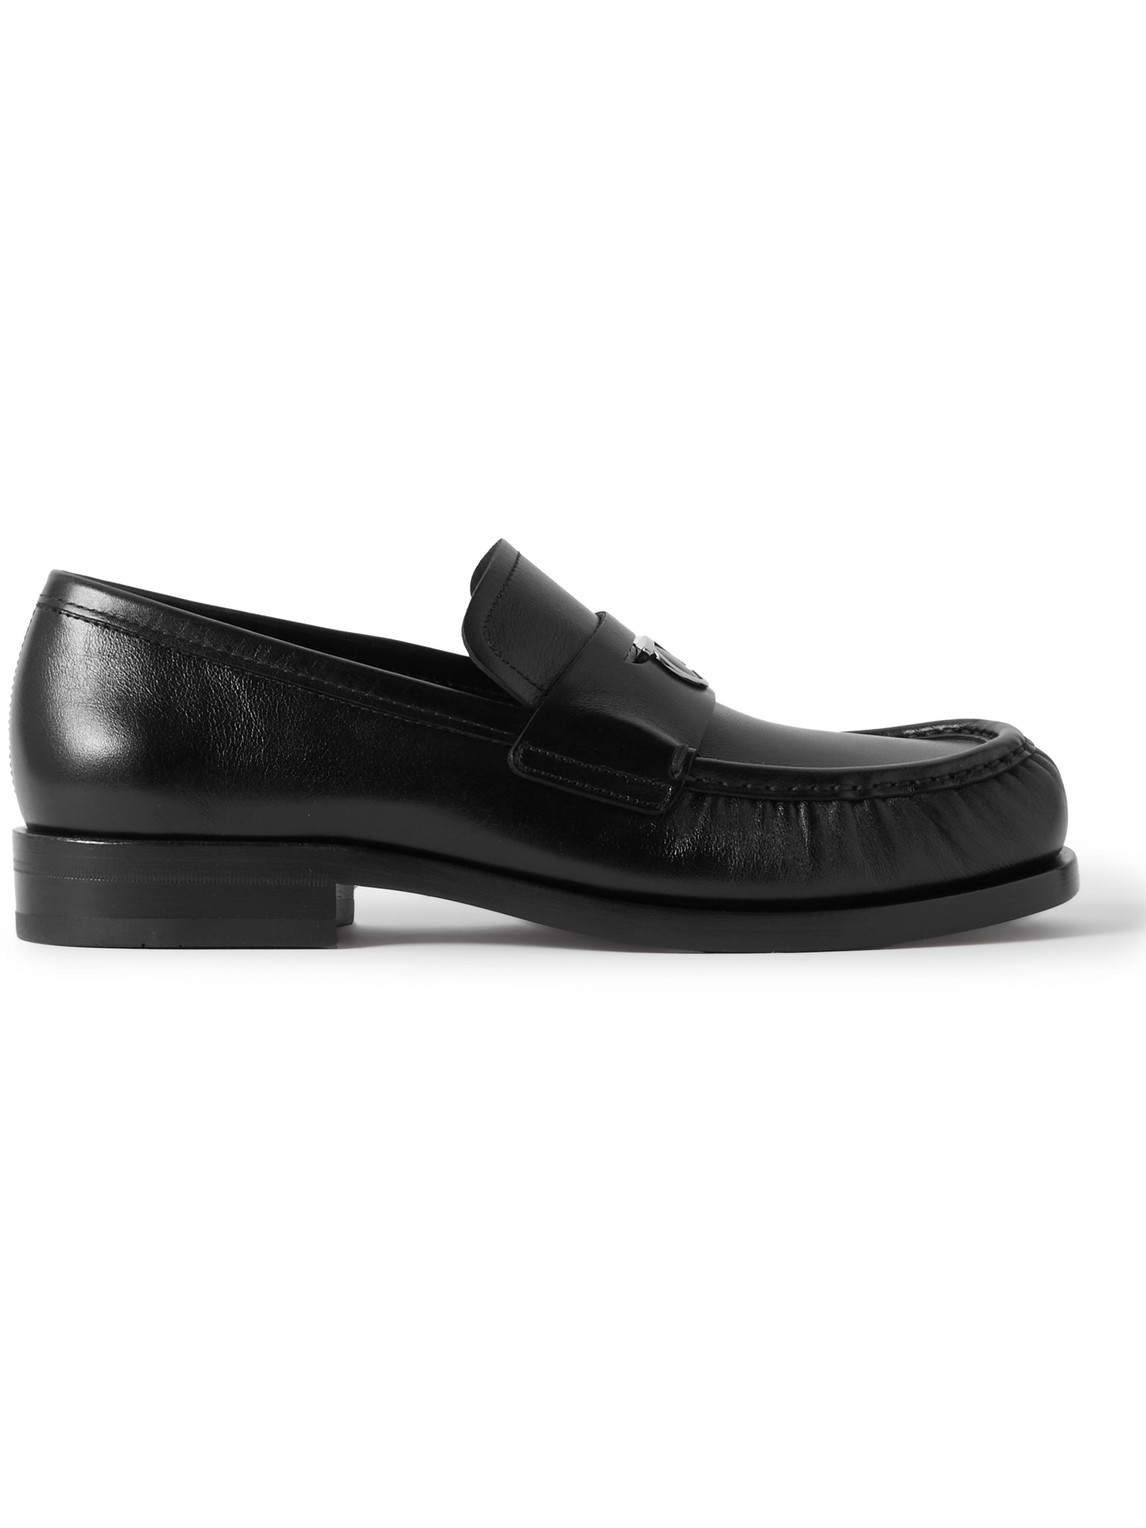 FERRAGAMO DELMO EMBELLISHED LEATHER PENNY LOAFERS